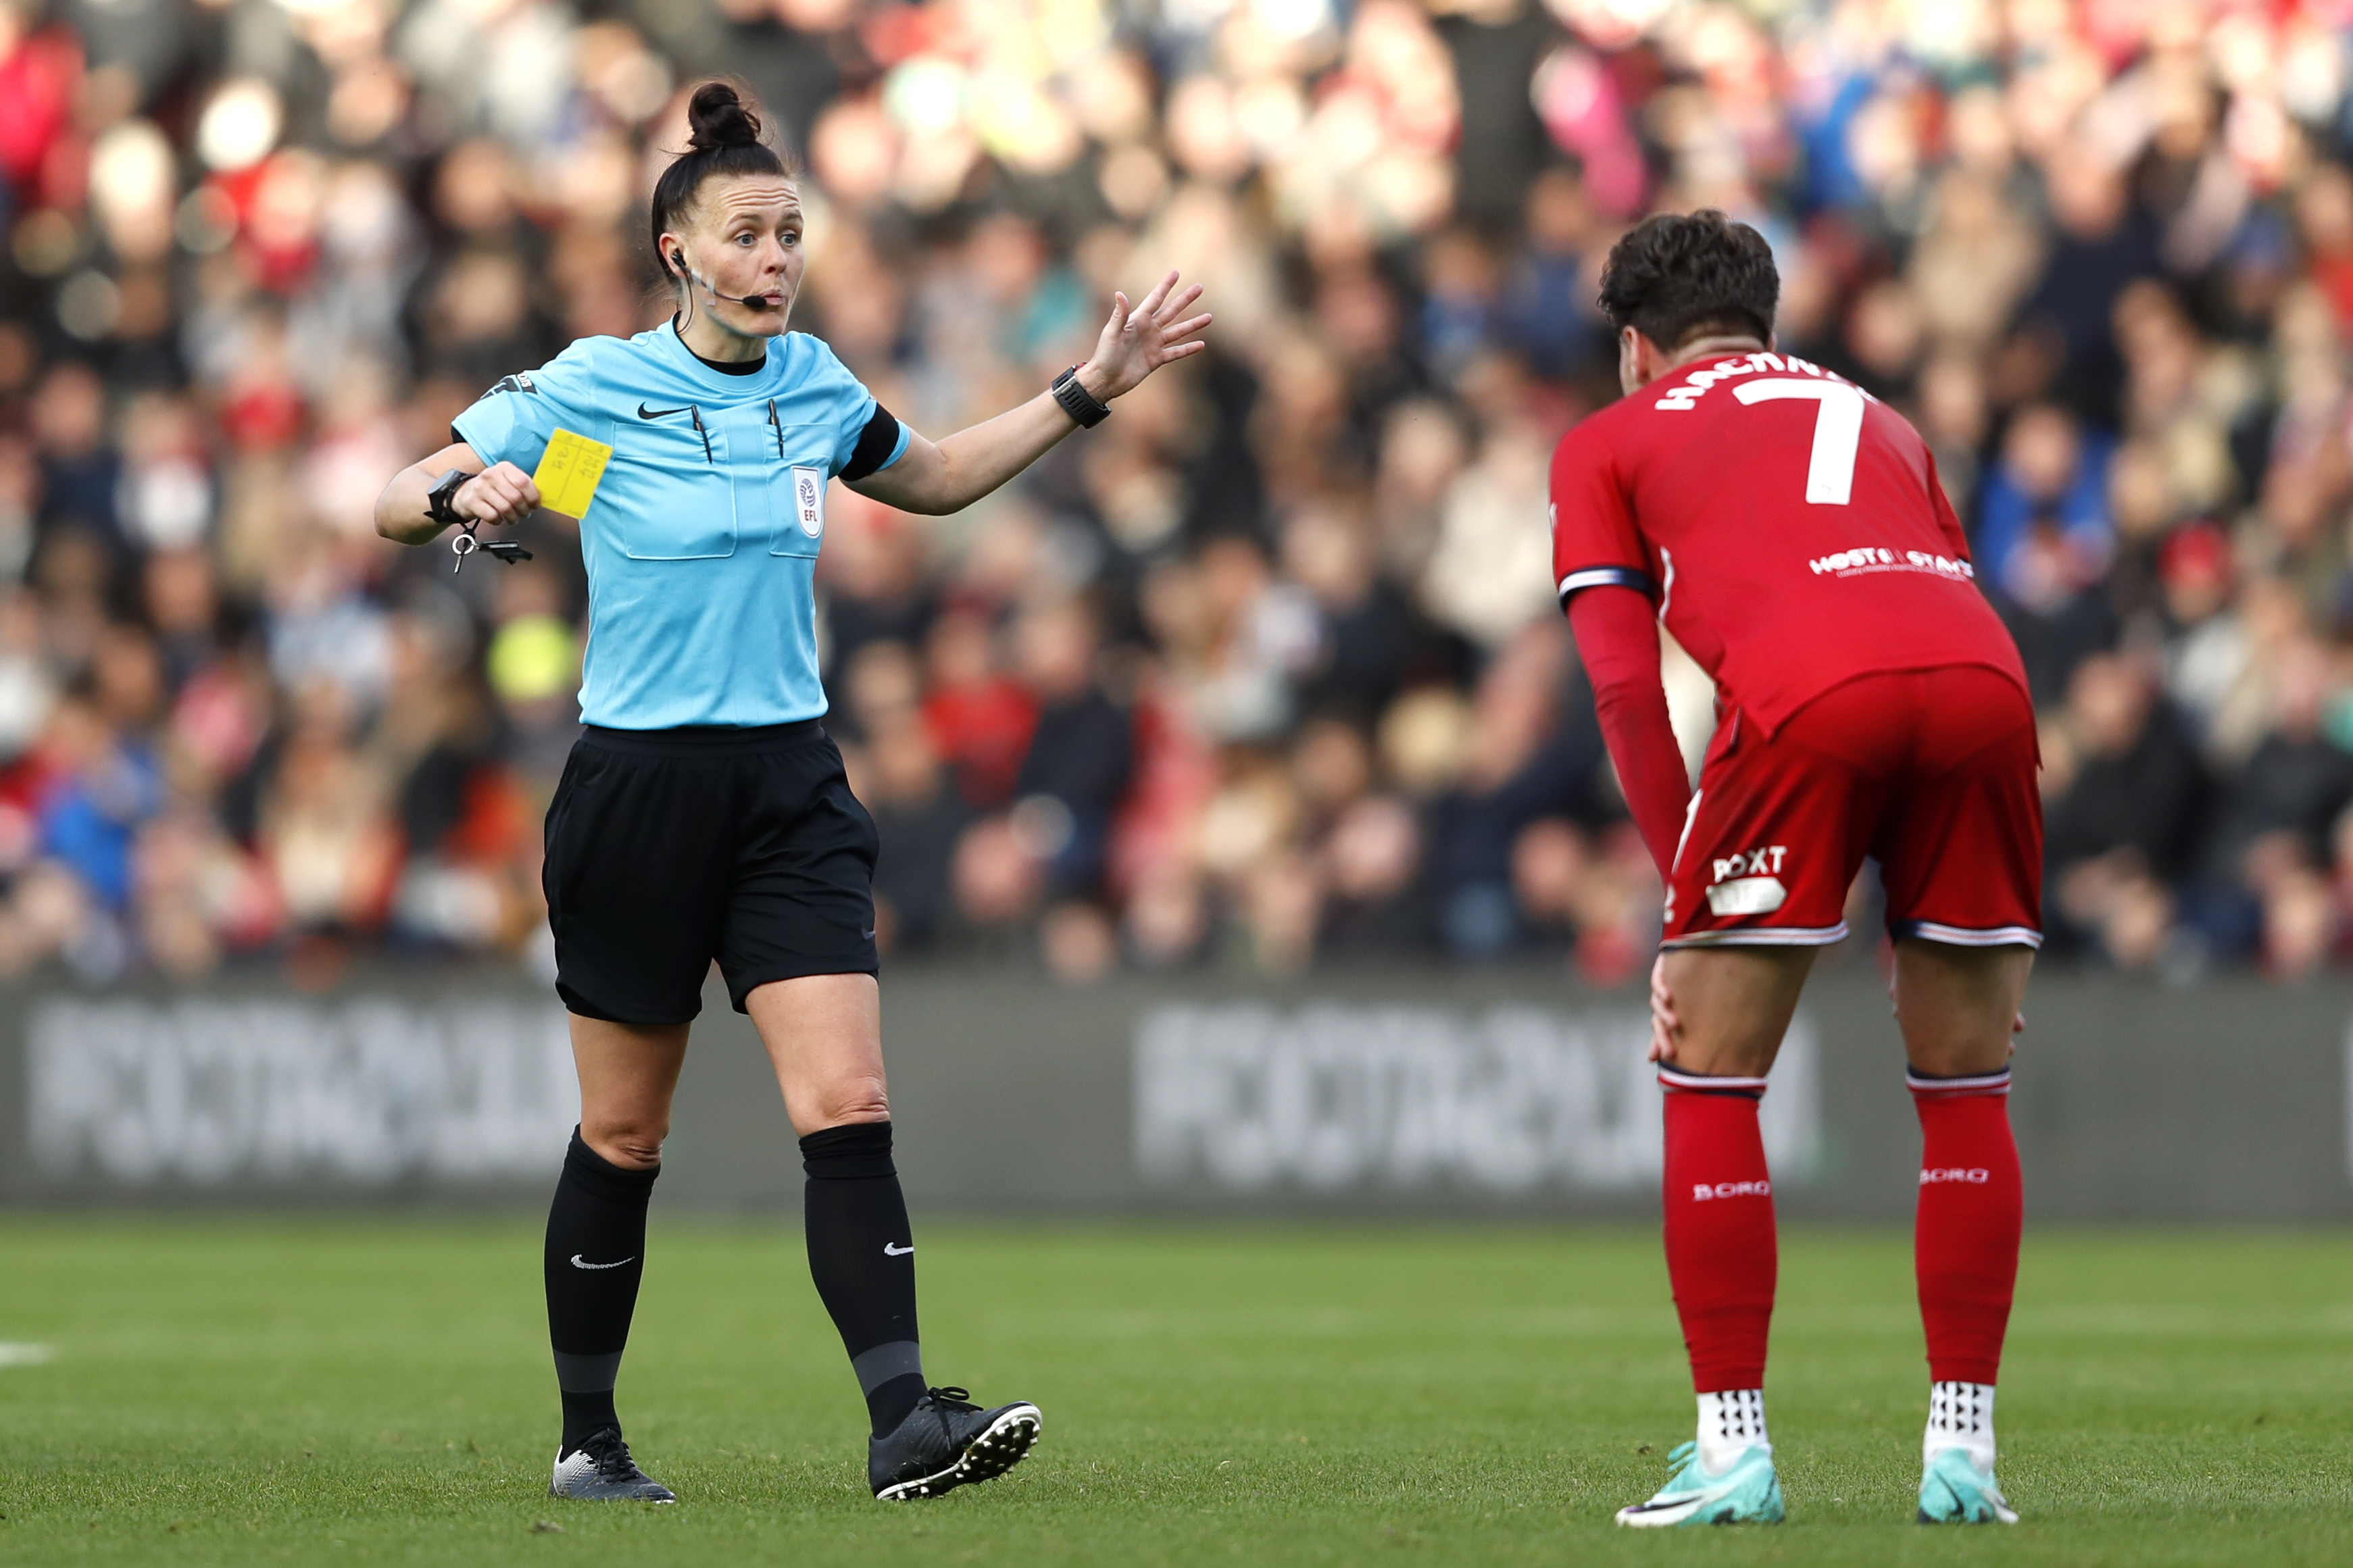 Referee Rebecca Welch (left) shows a yellow card to Middlesbrough’s Hayden Hackney